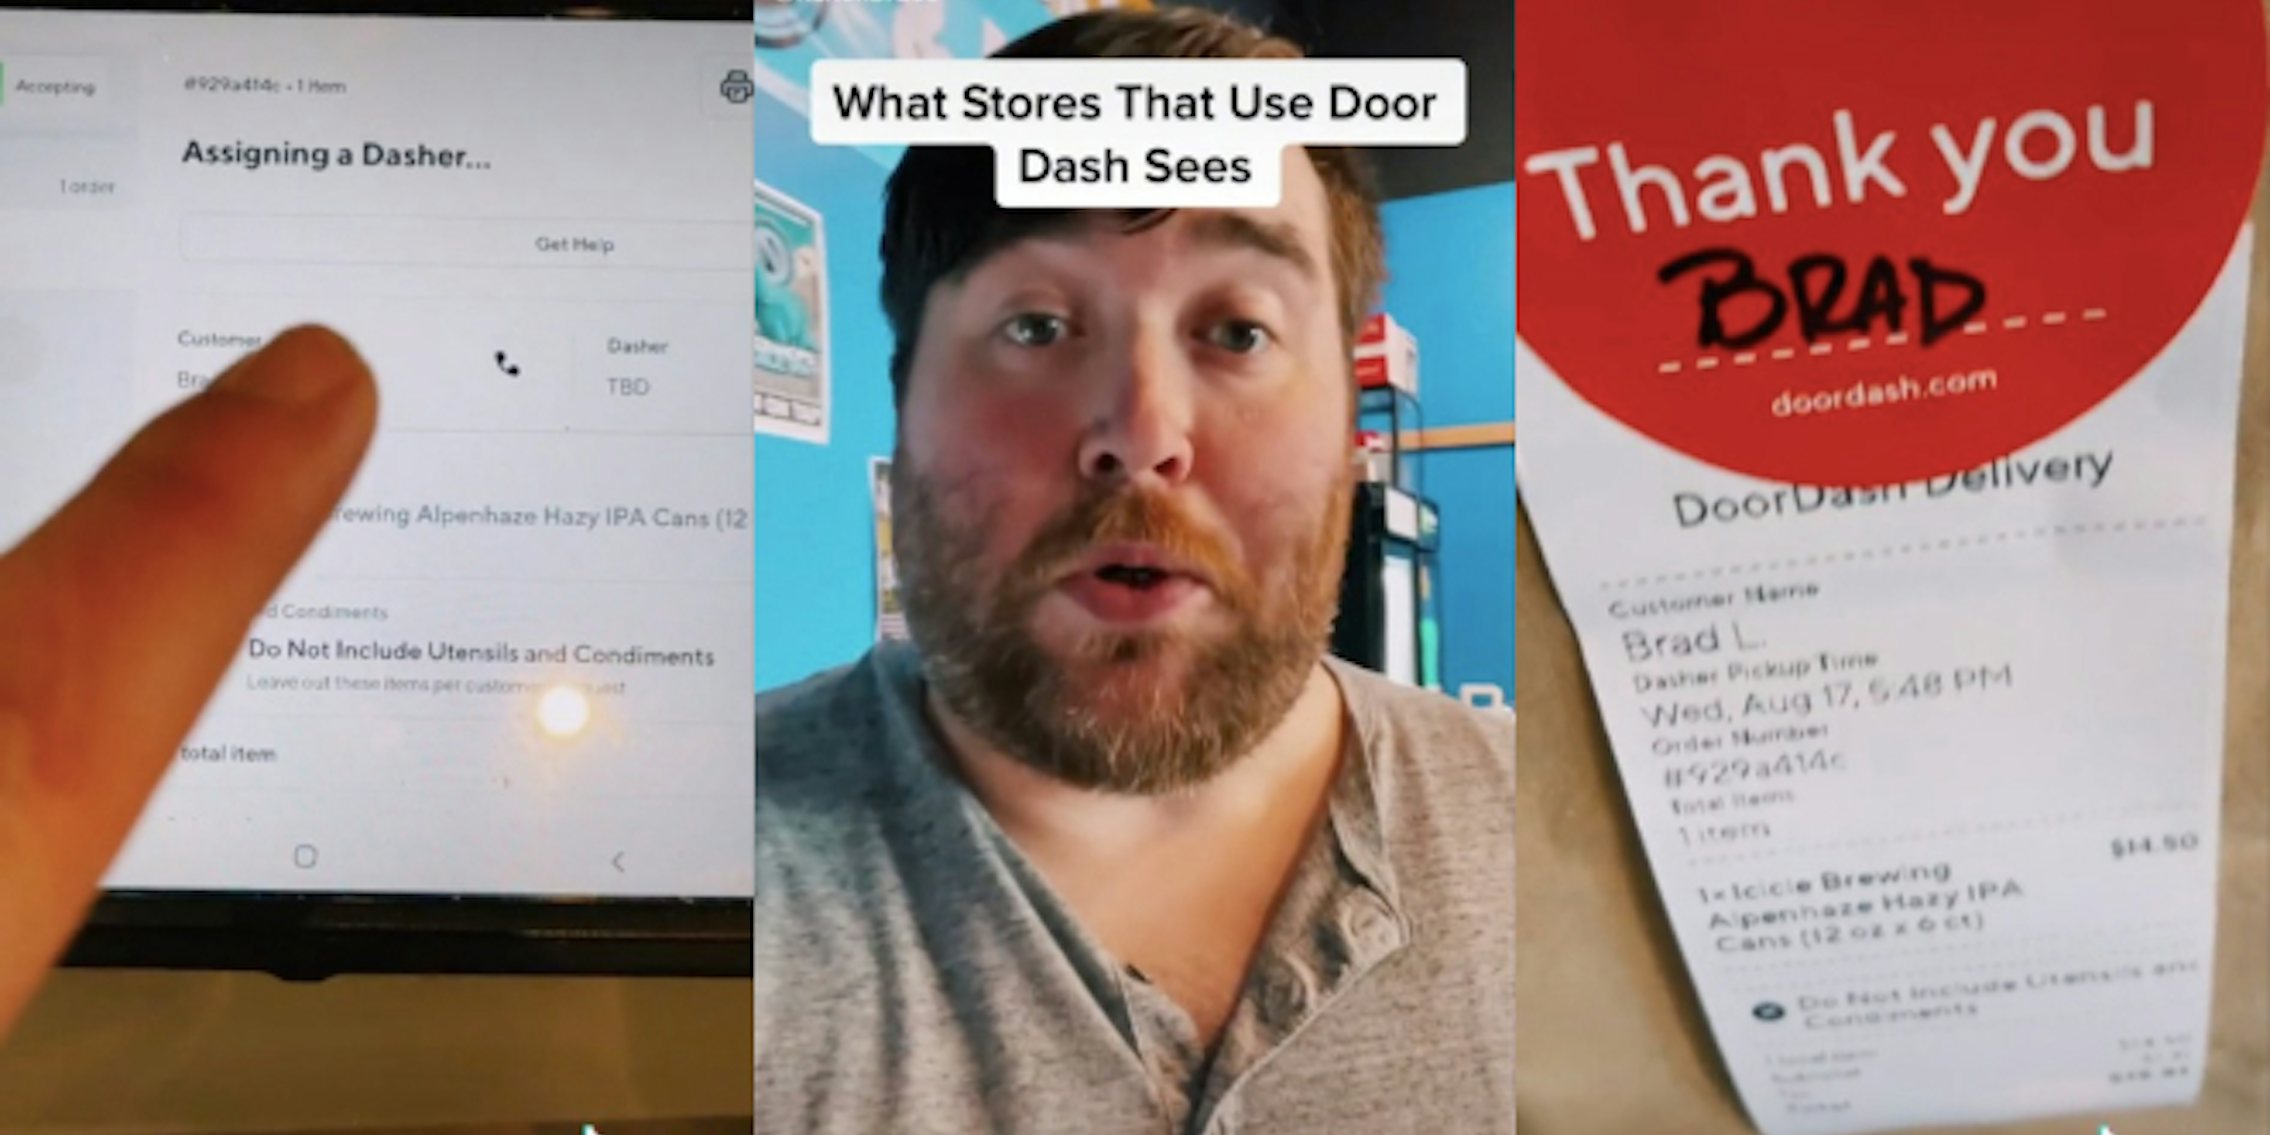 finger pointing to screen 'Assigning a Dasher...' (l) man speaking in front of blue walls caption 'What Stores That Use Door Dash Sees' (c) 'Thank you Brad' sticker on receipt on DoorDash bag (r)